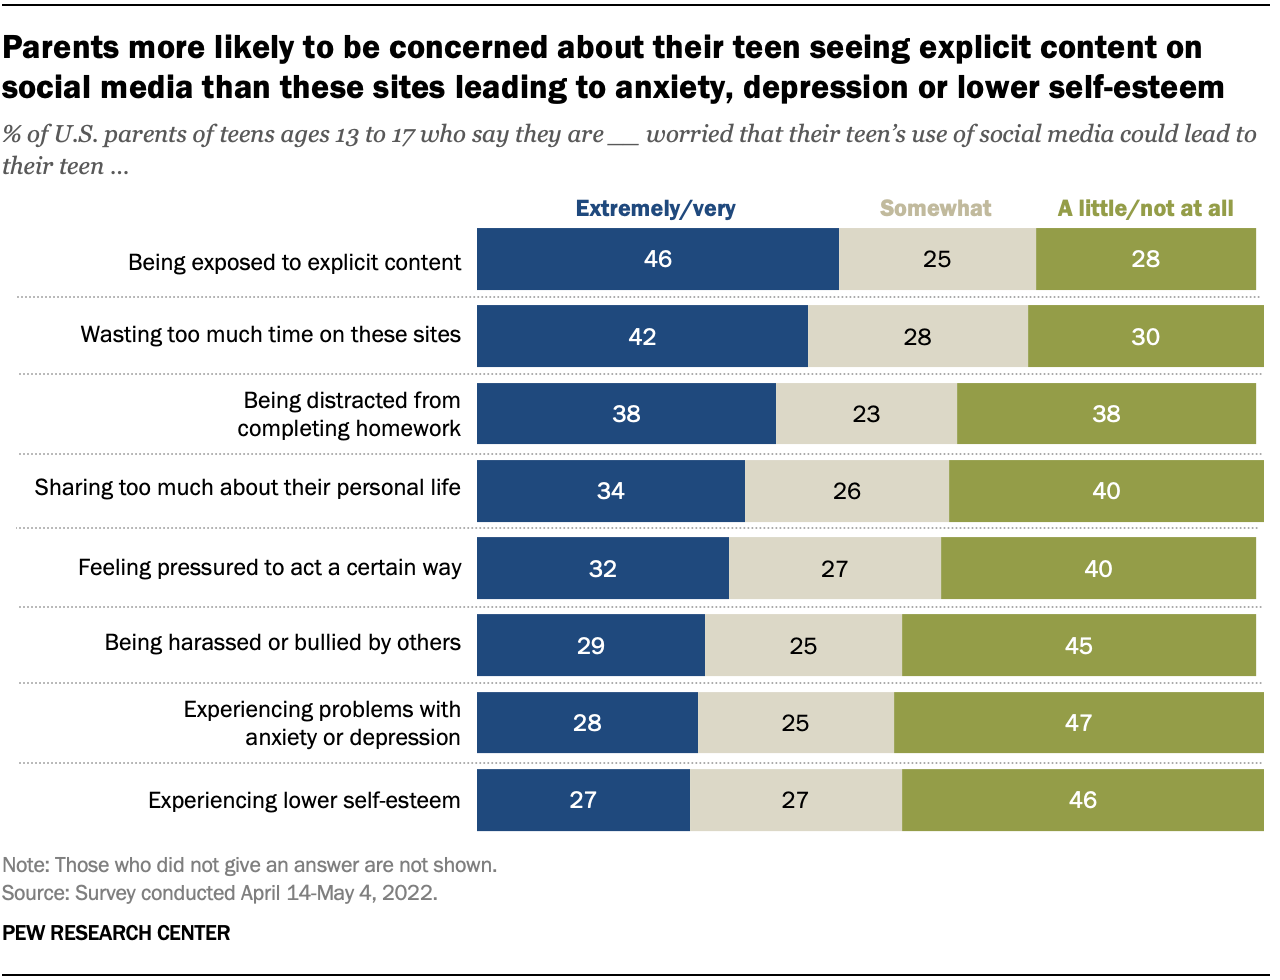 A bar chart showing that parents are more likely to be concerned about their teen seeing explicit content on social media than these sites leading to anxiety, depression or lower self-esteem